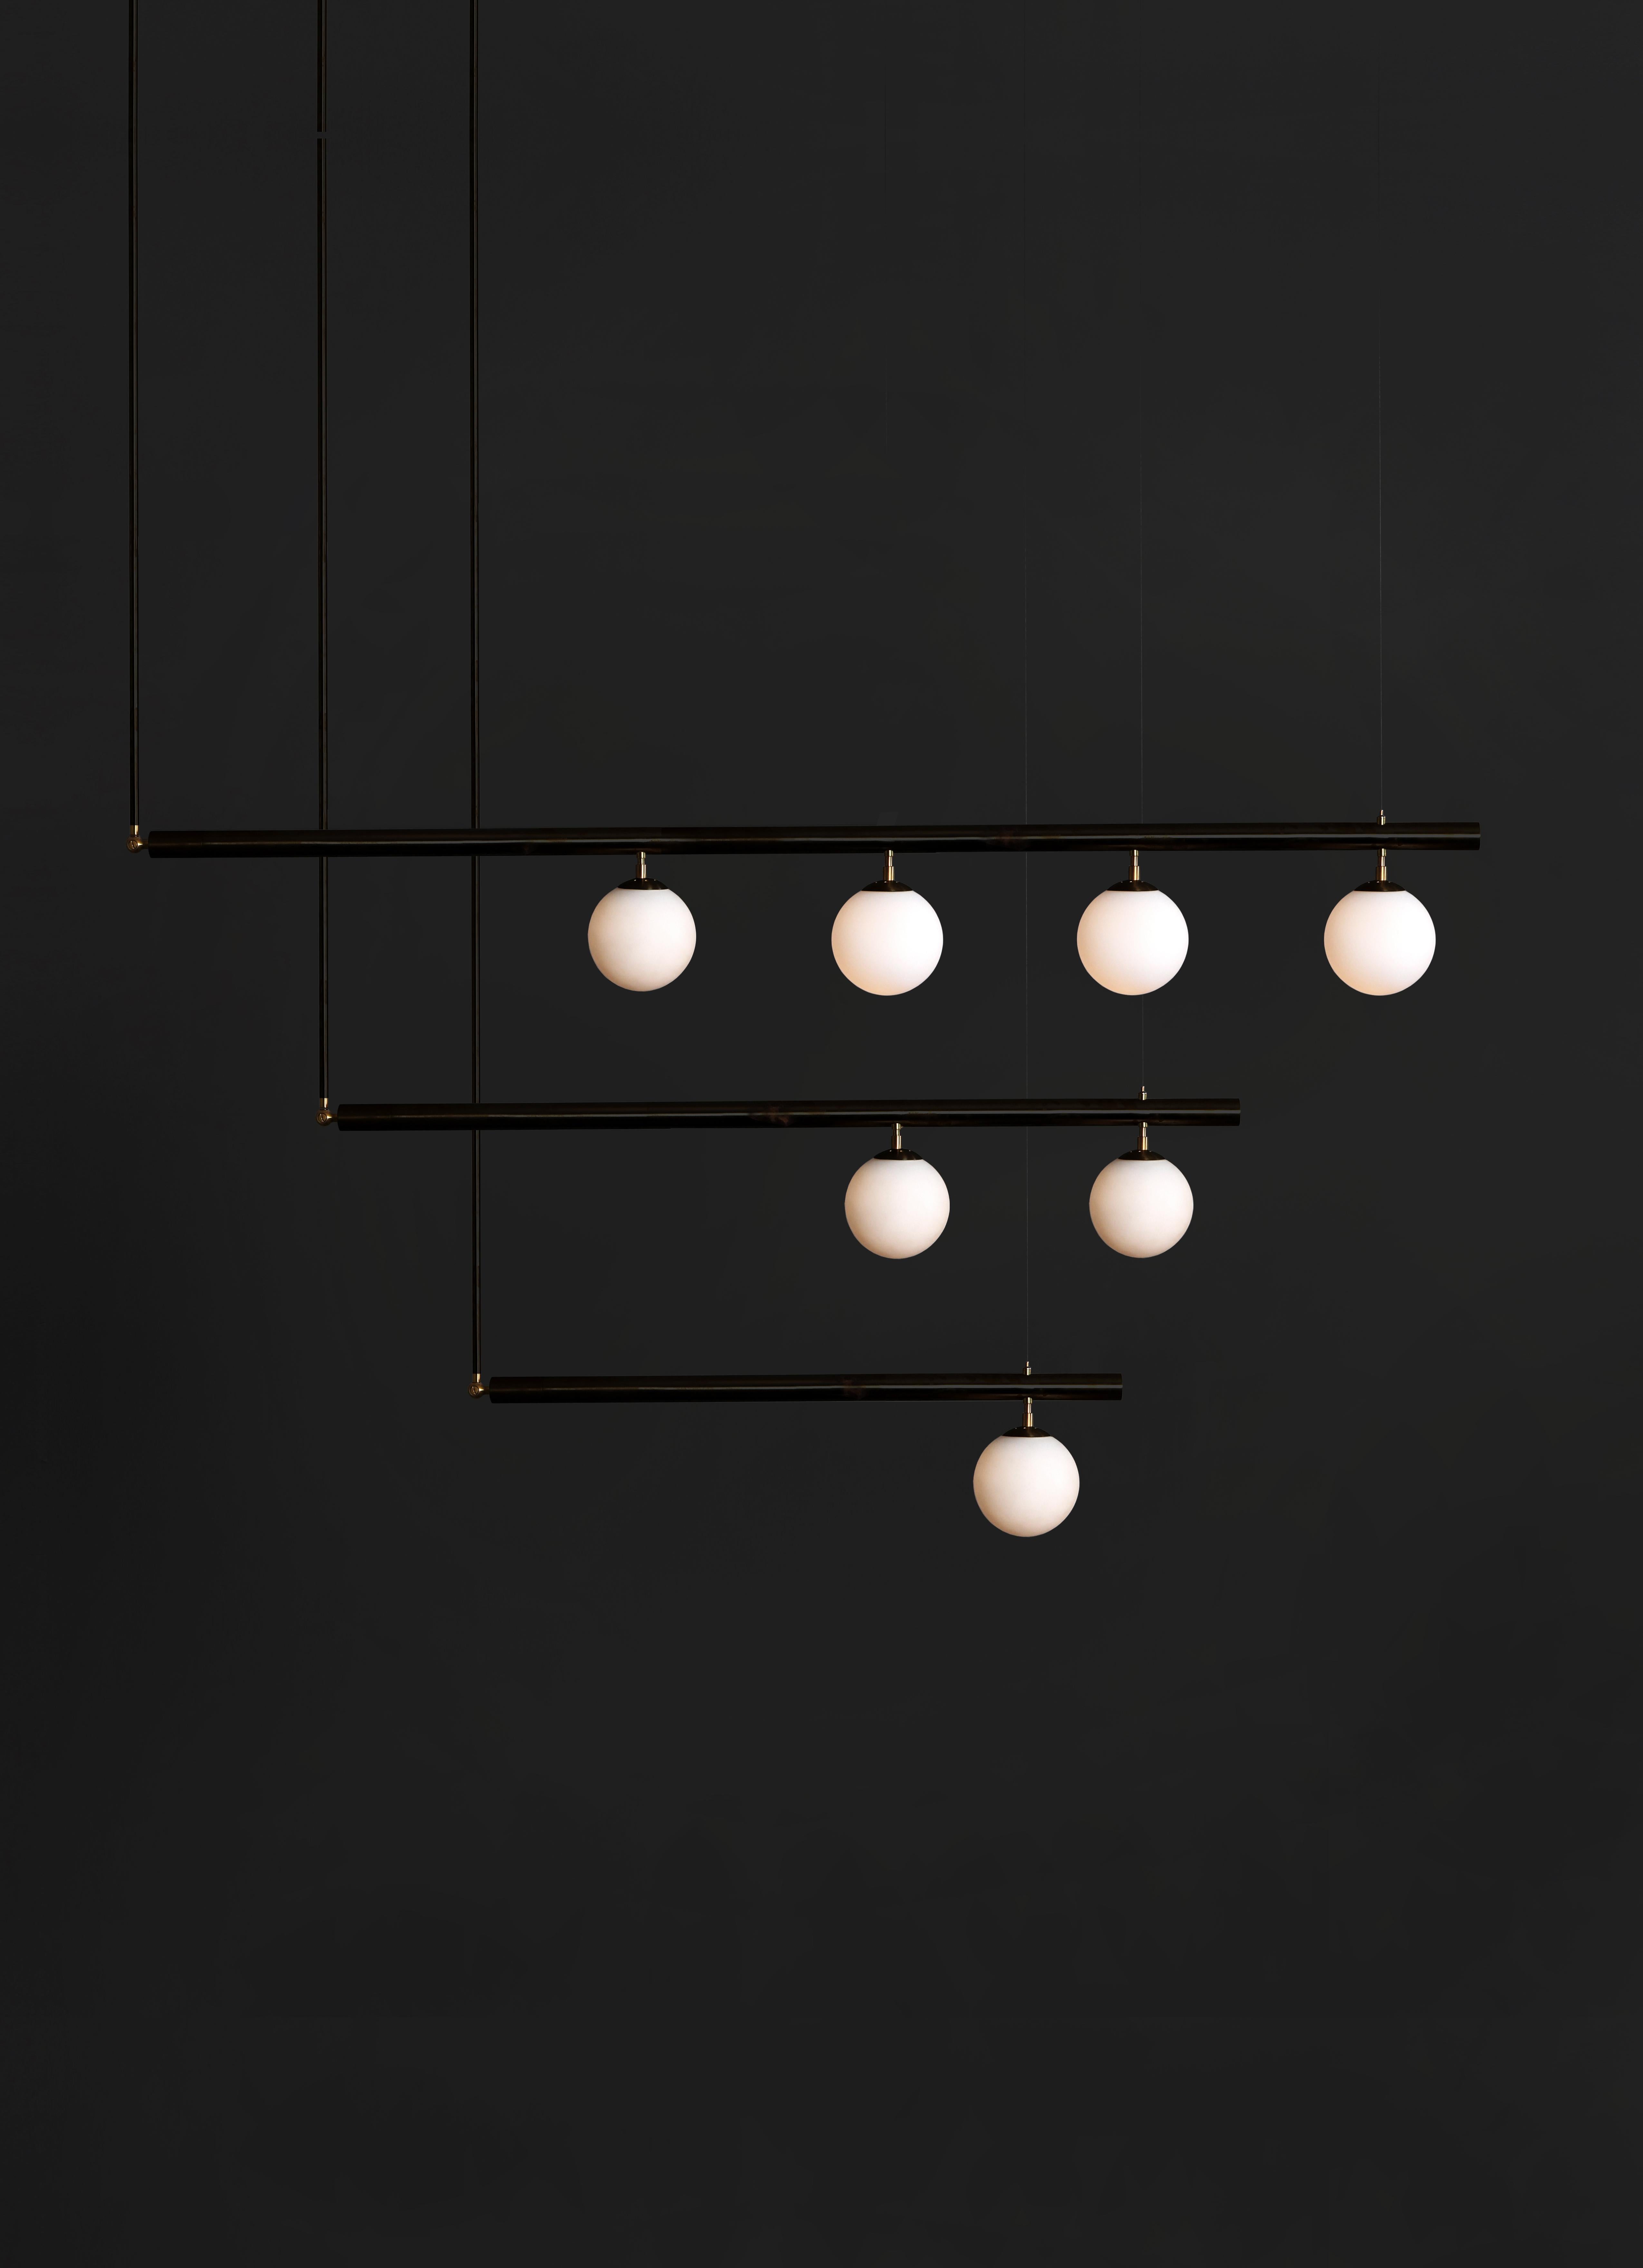 Black satellite IV - sculpted pendant by Paul Matter
Satellite IV
Blackened brass with brushed brass details
Dimensions: 183 x 180 x 15.2 cm

Satellite is inspired by the conceptual and Minimalist movement of the 1960s and 1970s. These light